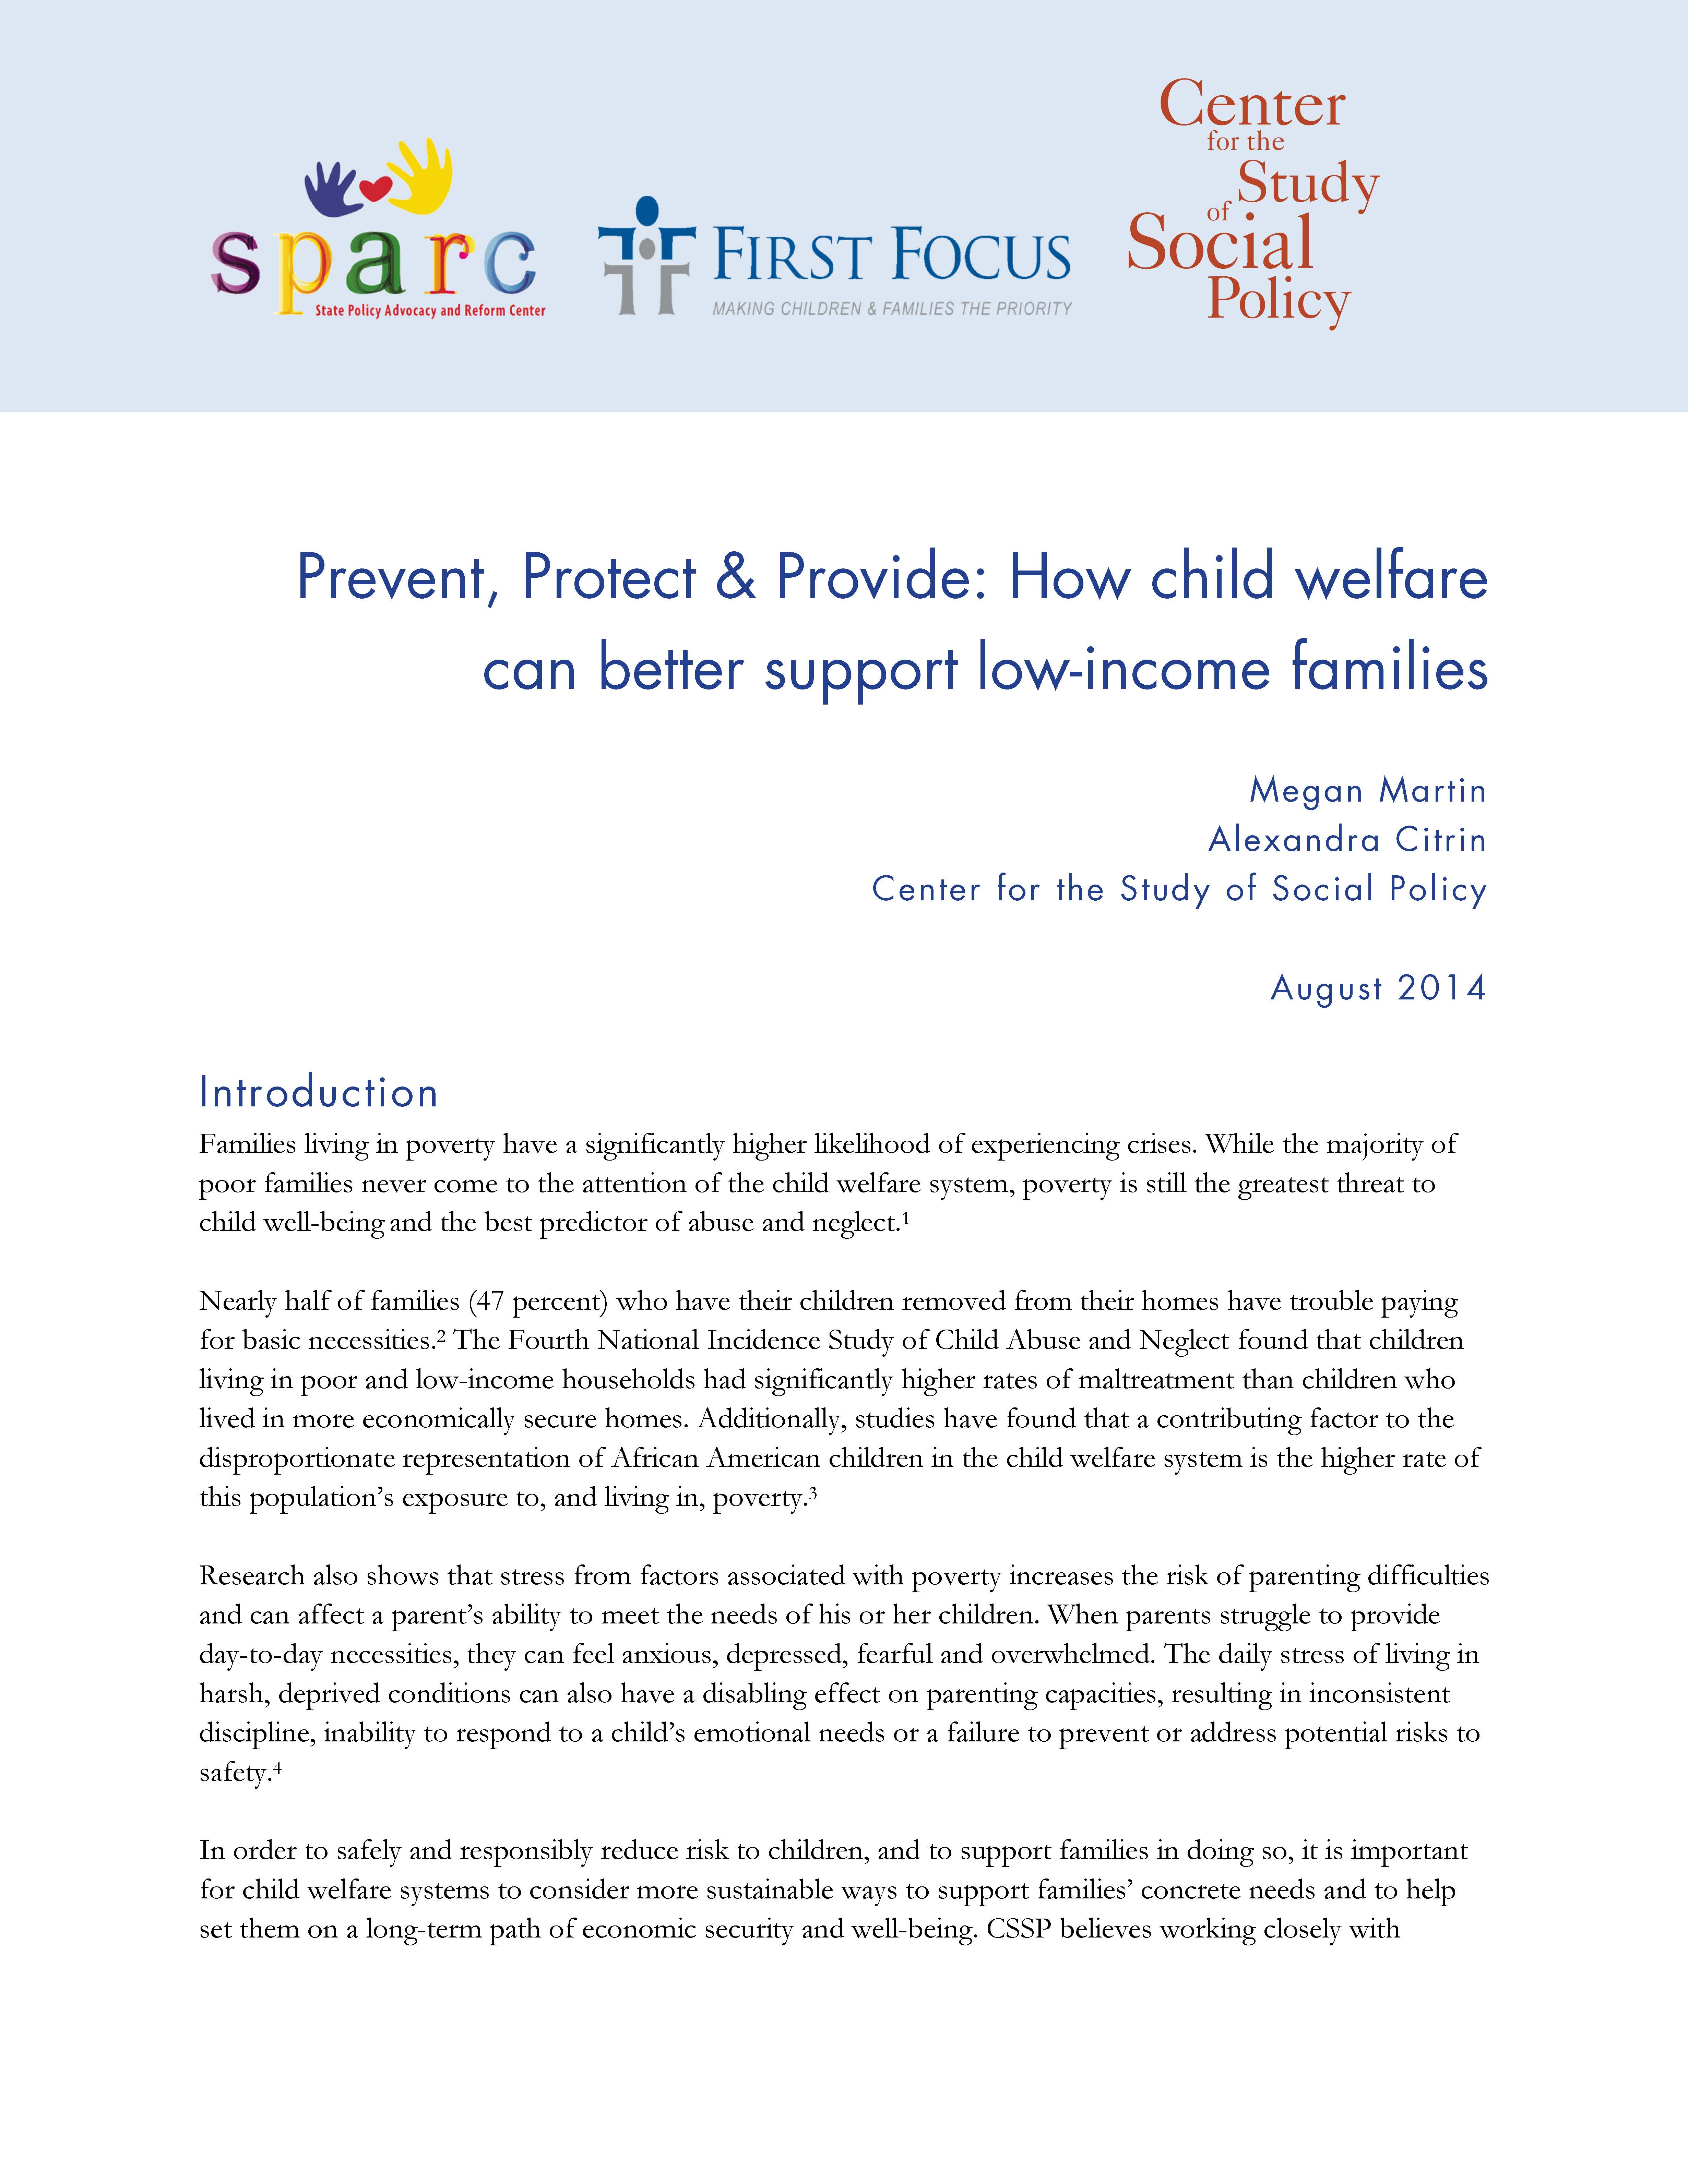 Prevent, Protect & Provide: How child welfare can better support low-income families